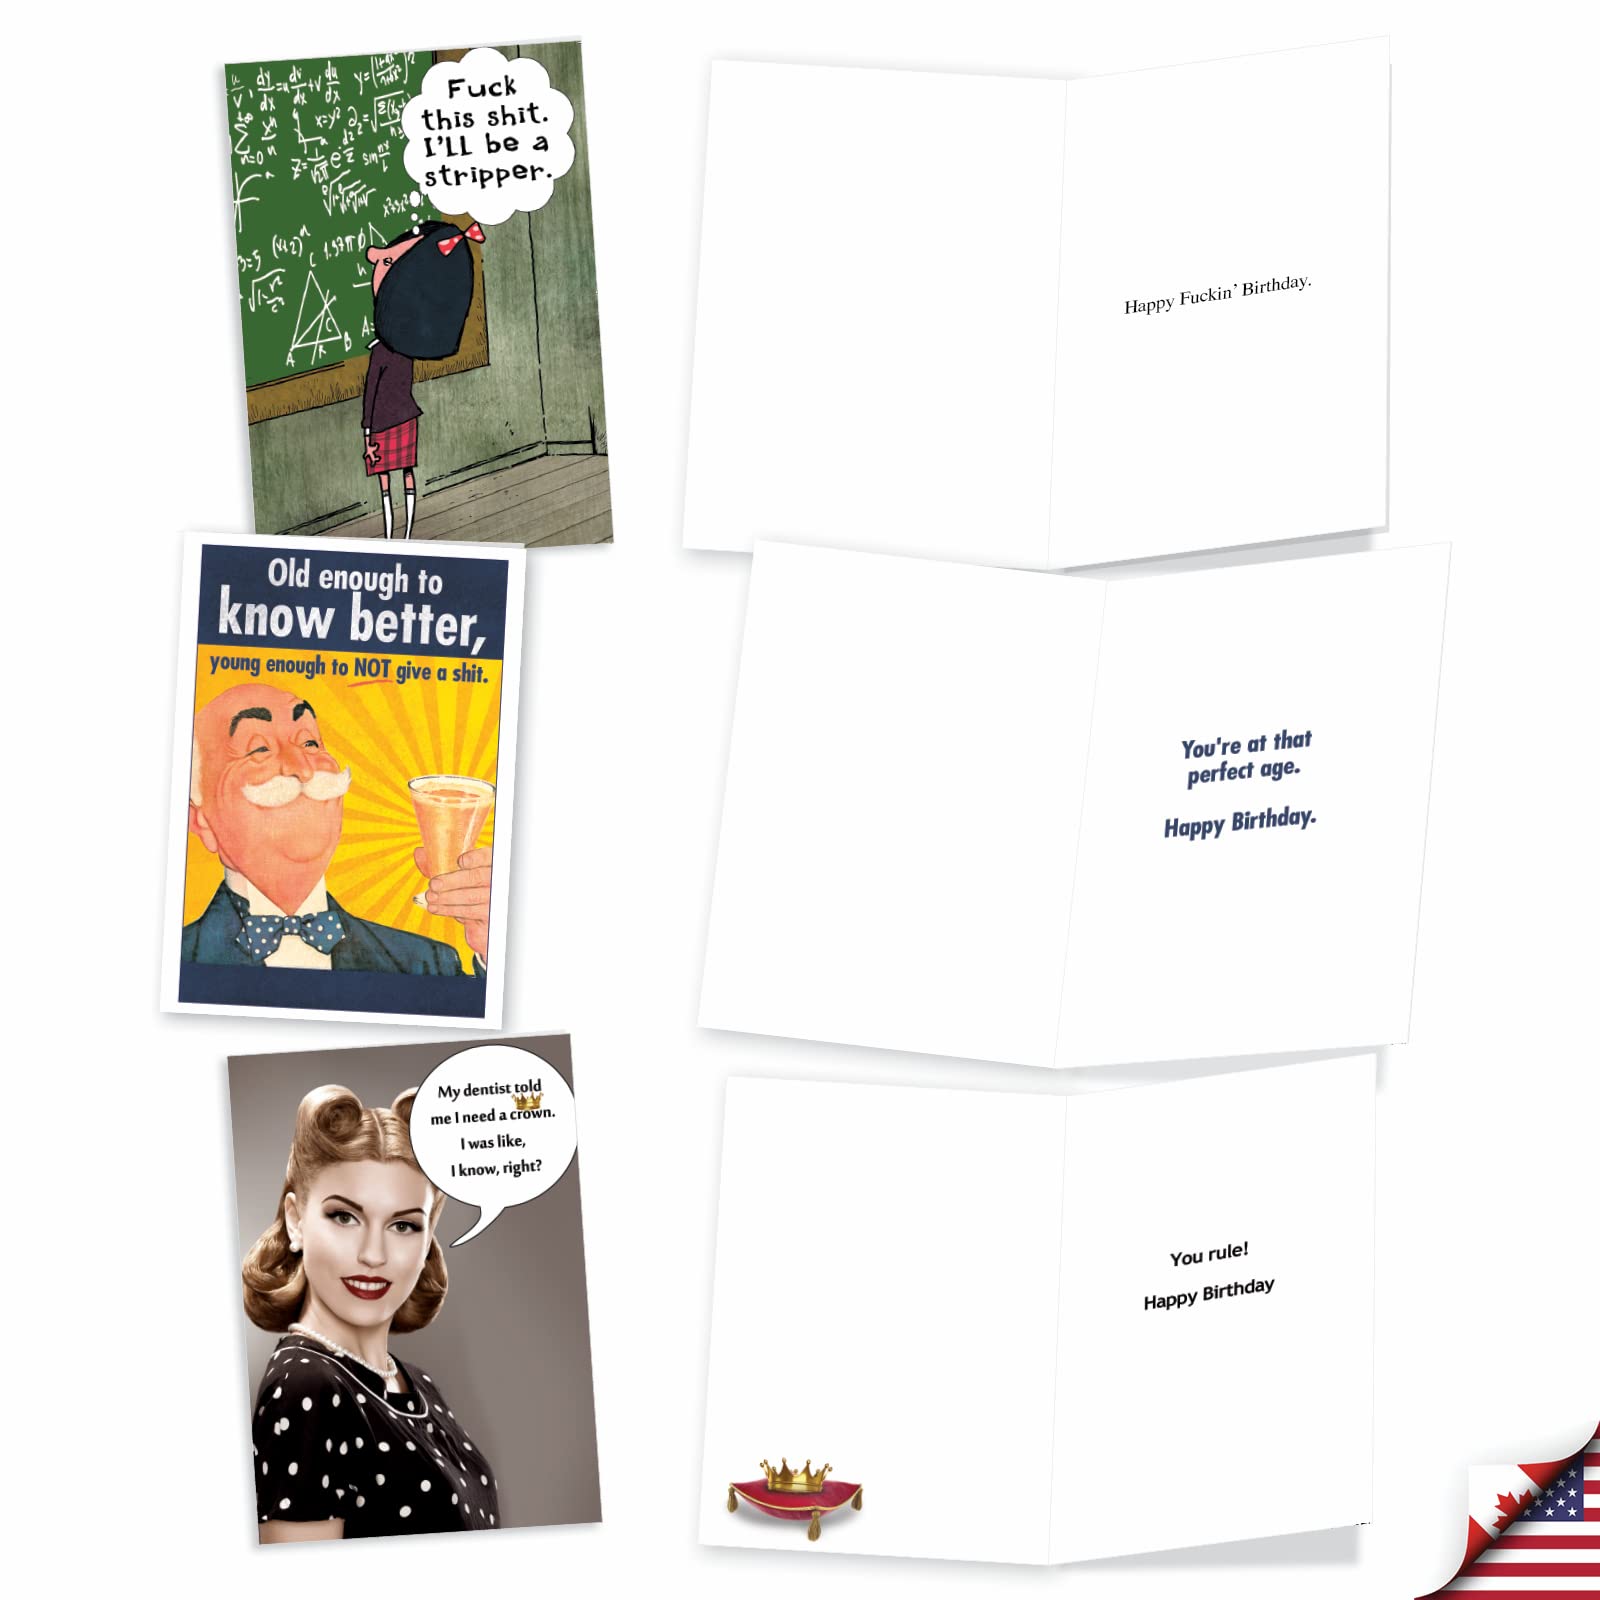 NobleWorks - 10 Funny Birthday Cards Box Set for Men and Women, Assorted Bulk Humor Greeting Cards, Envelopes - A Very Funny Birthday AC5979BDG-B1x10